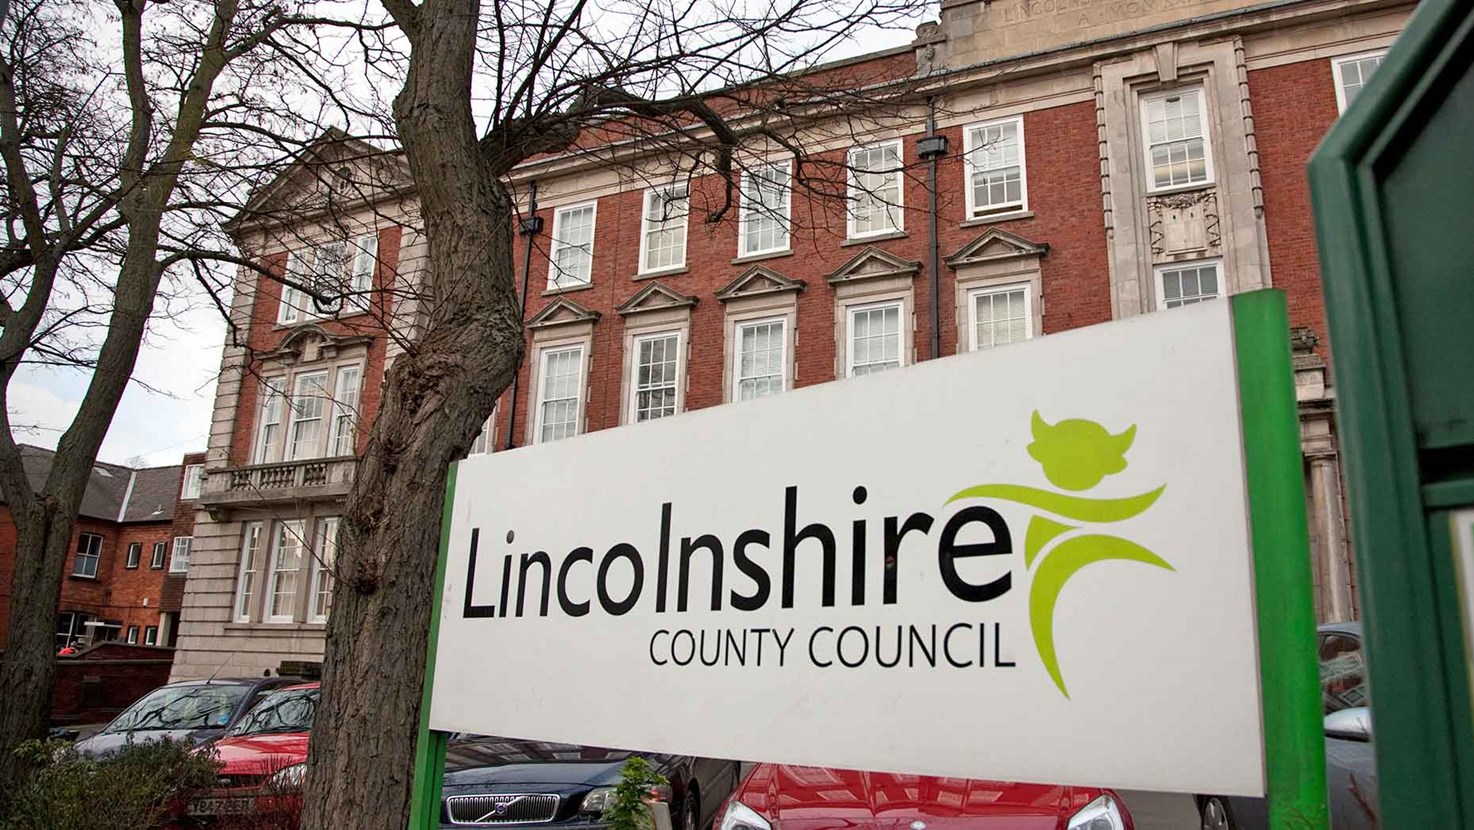 View all of the events and meetings that PCC Marc Jones attended or hosted at Lincolnshire County Council in 2021